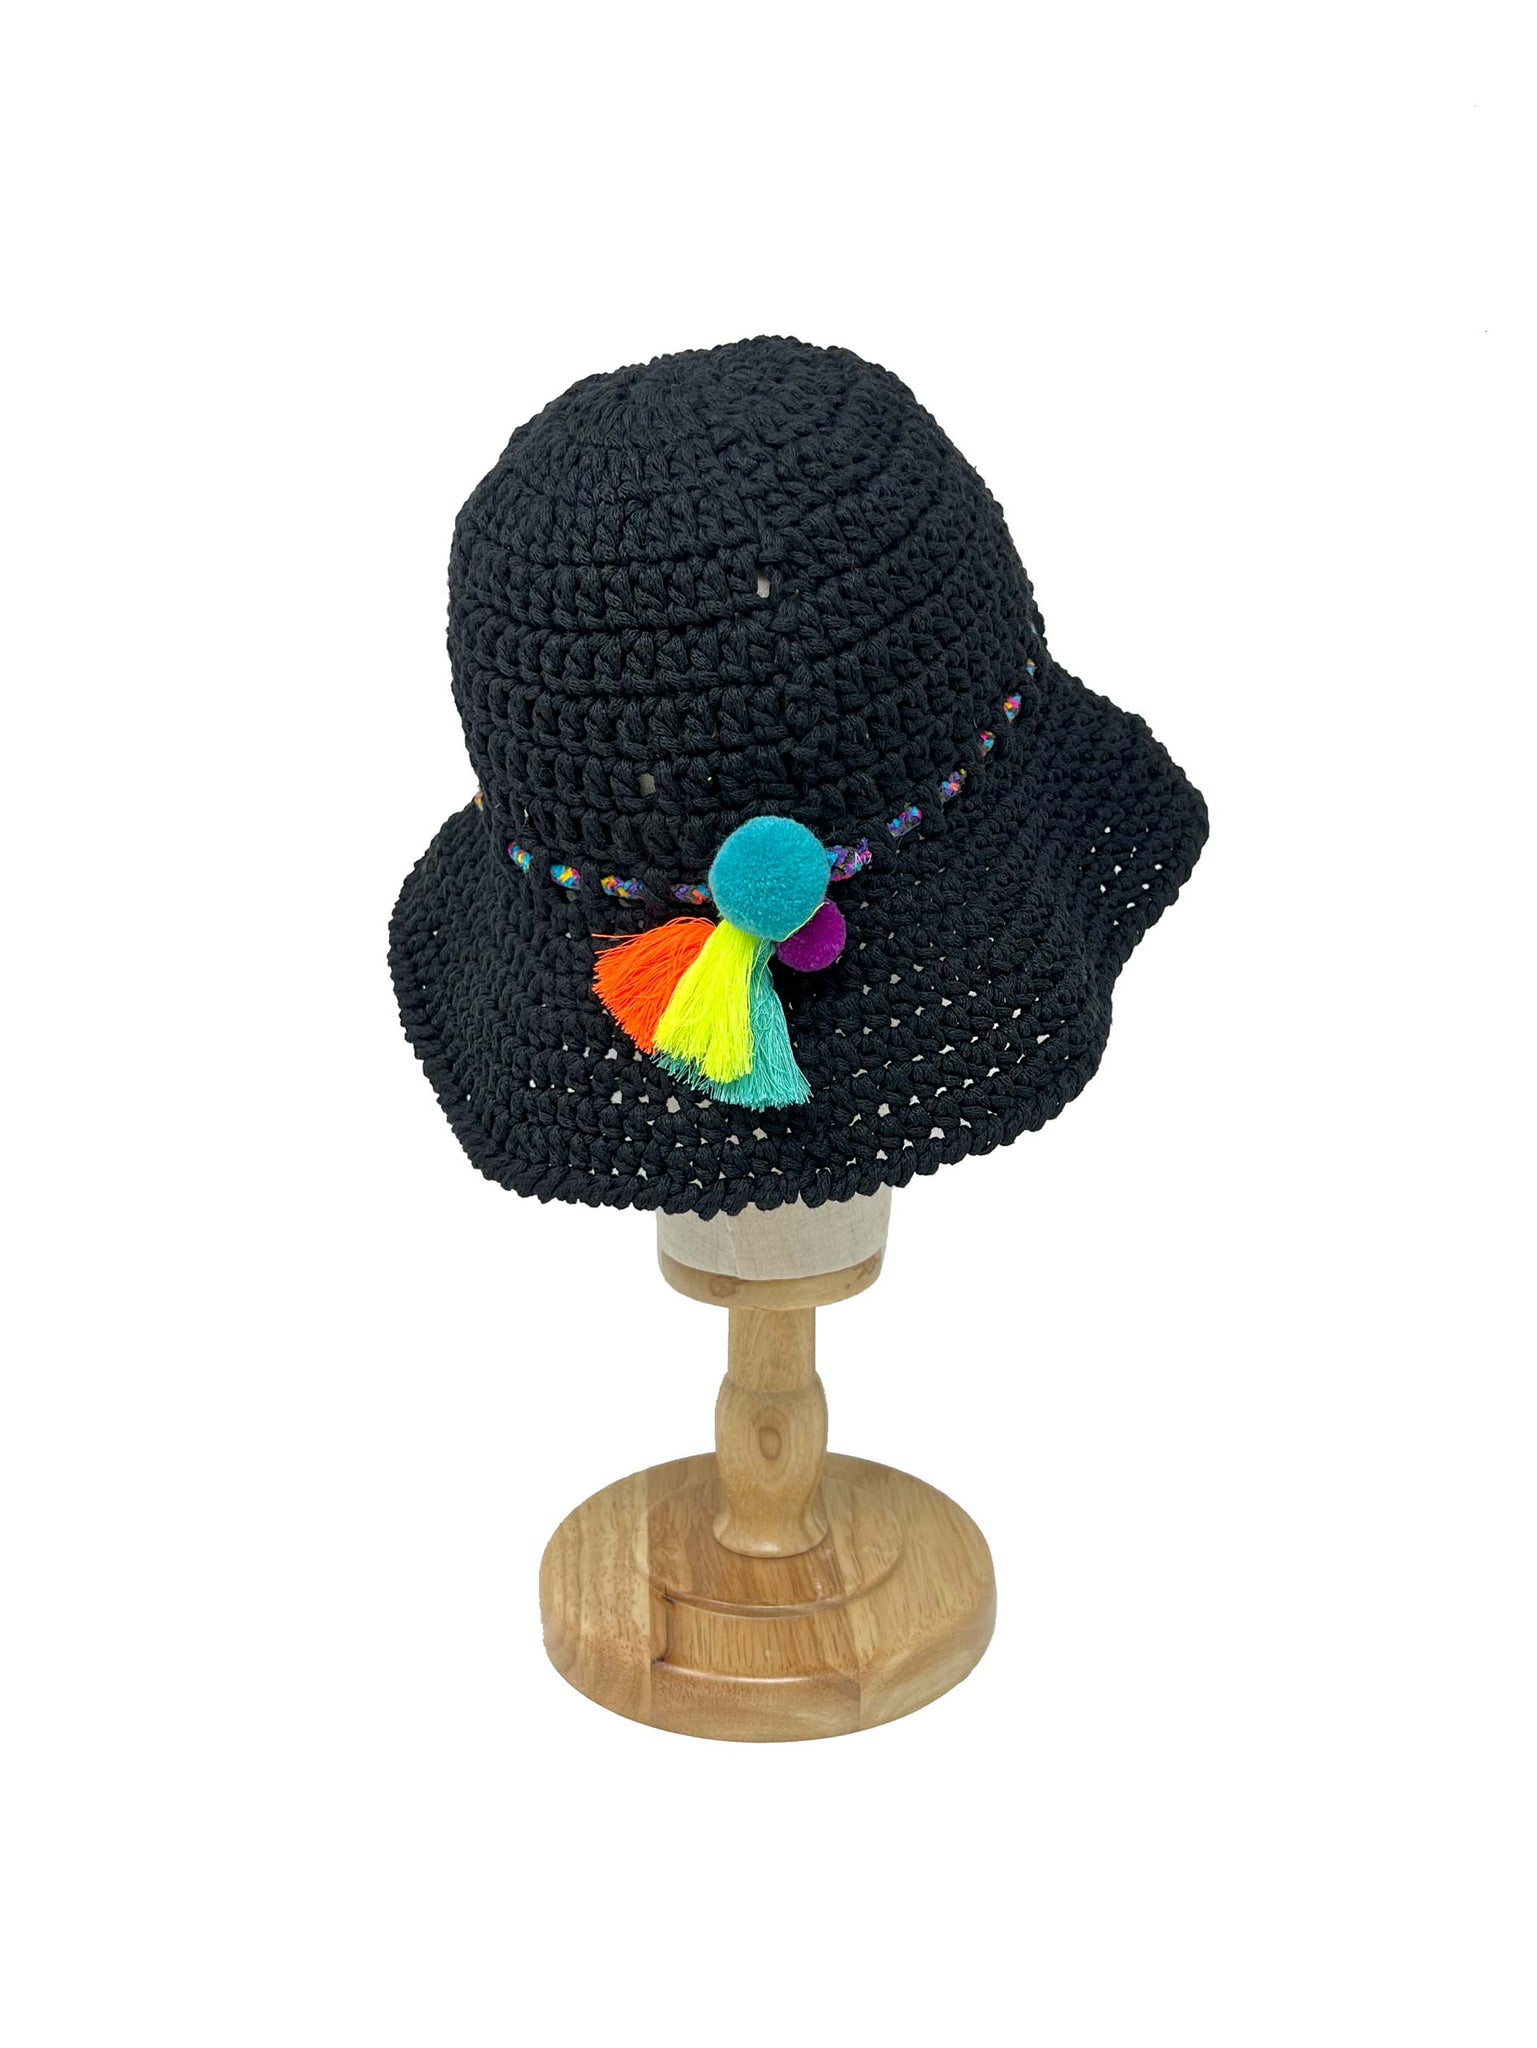 Black crocheted bucket hat with pom poms